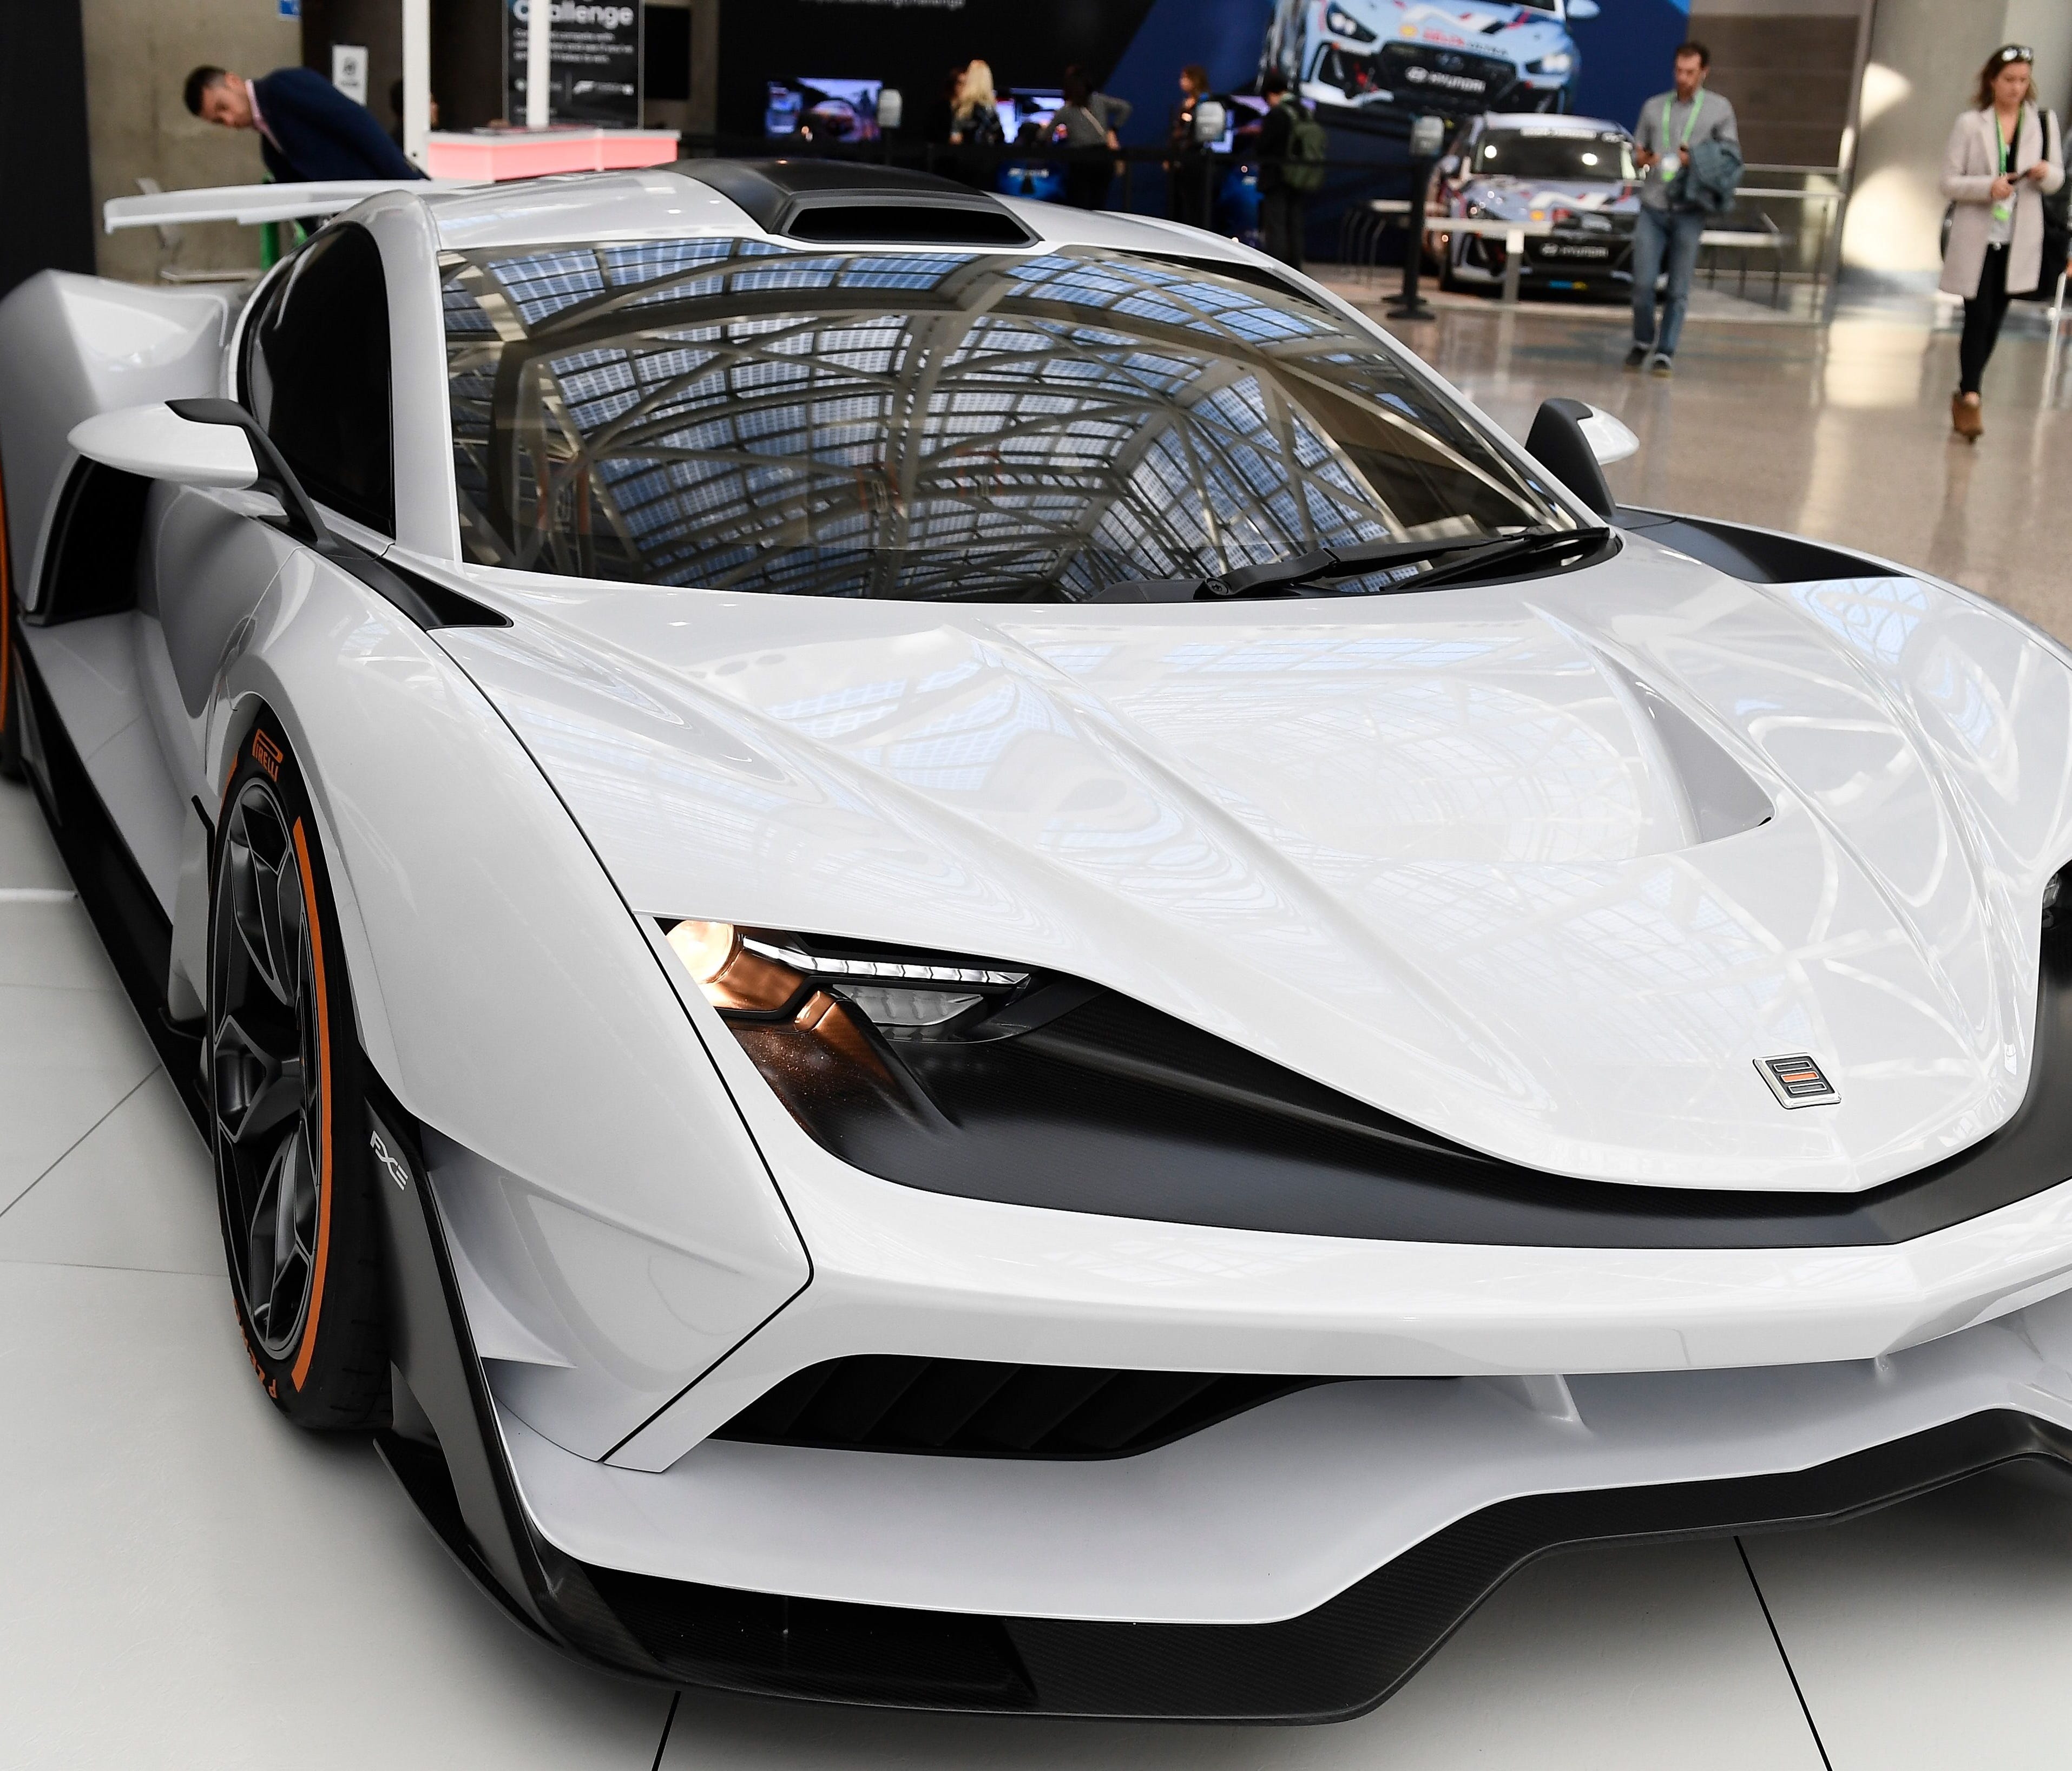 Aria Group unveiled the FXE, a mid-engine hybrid that will go 0 to 60 mph in 3.1 seconds.